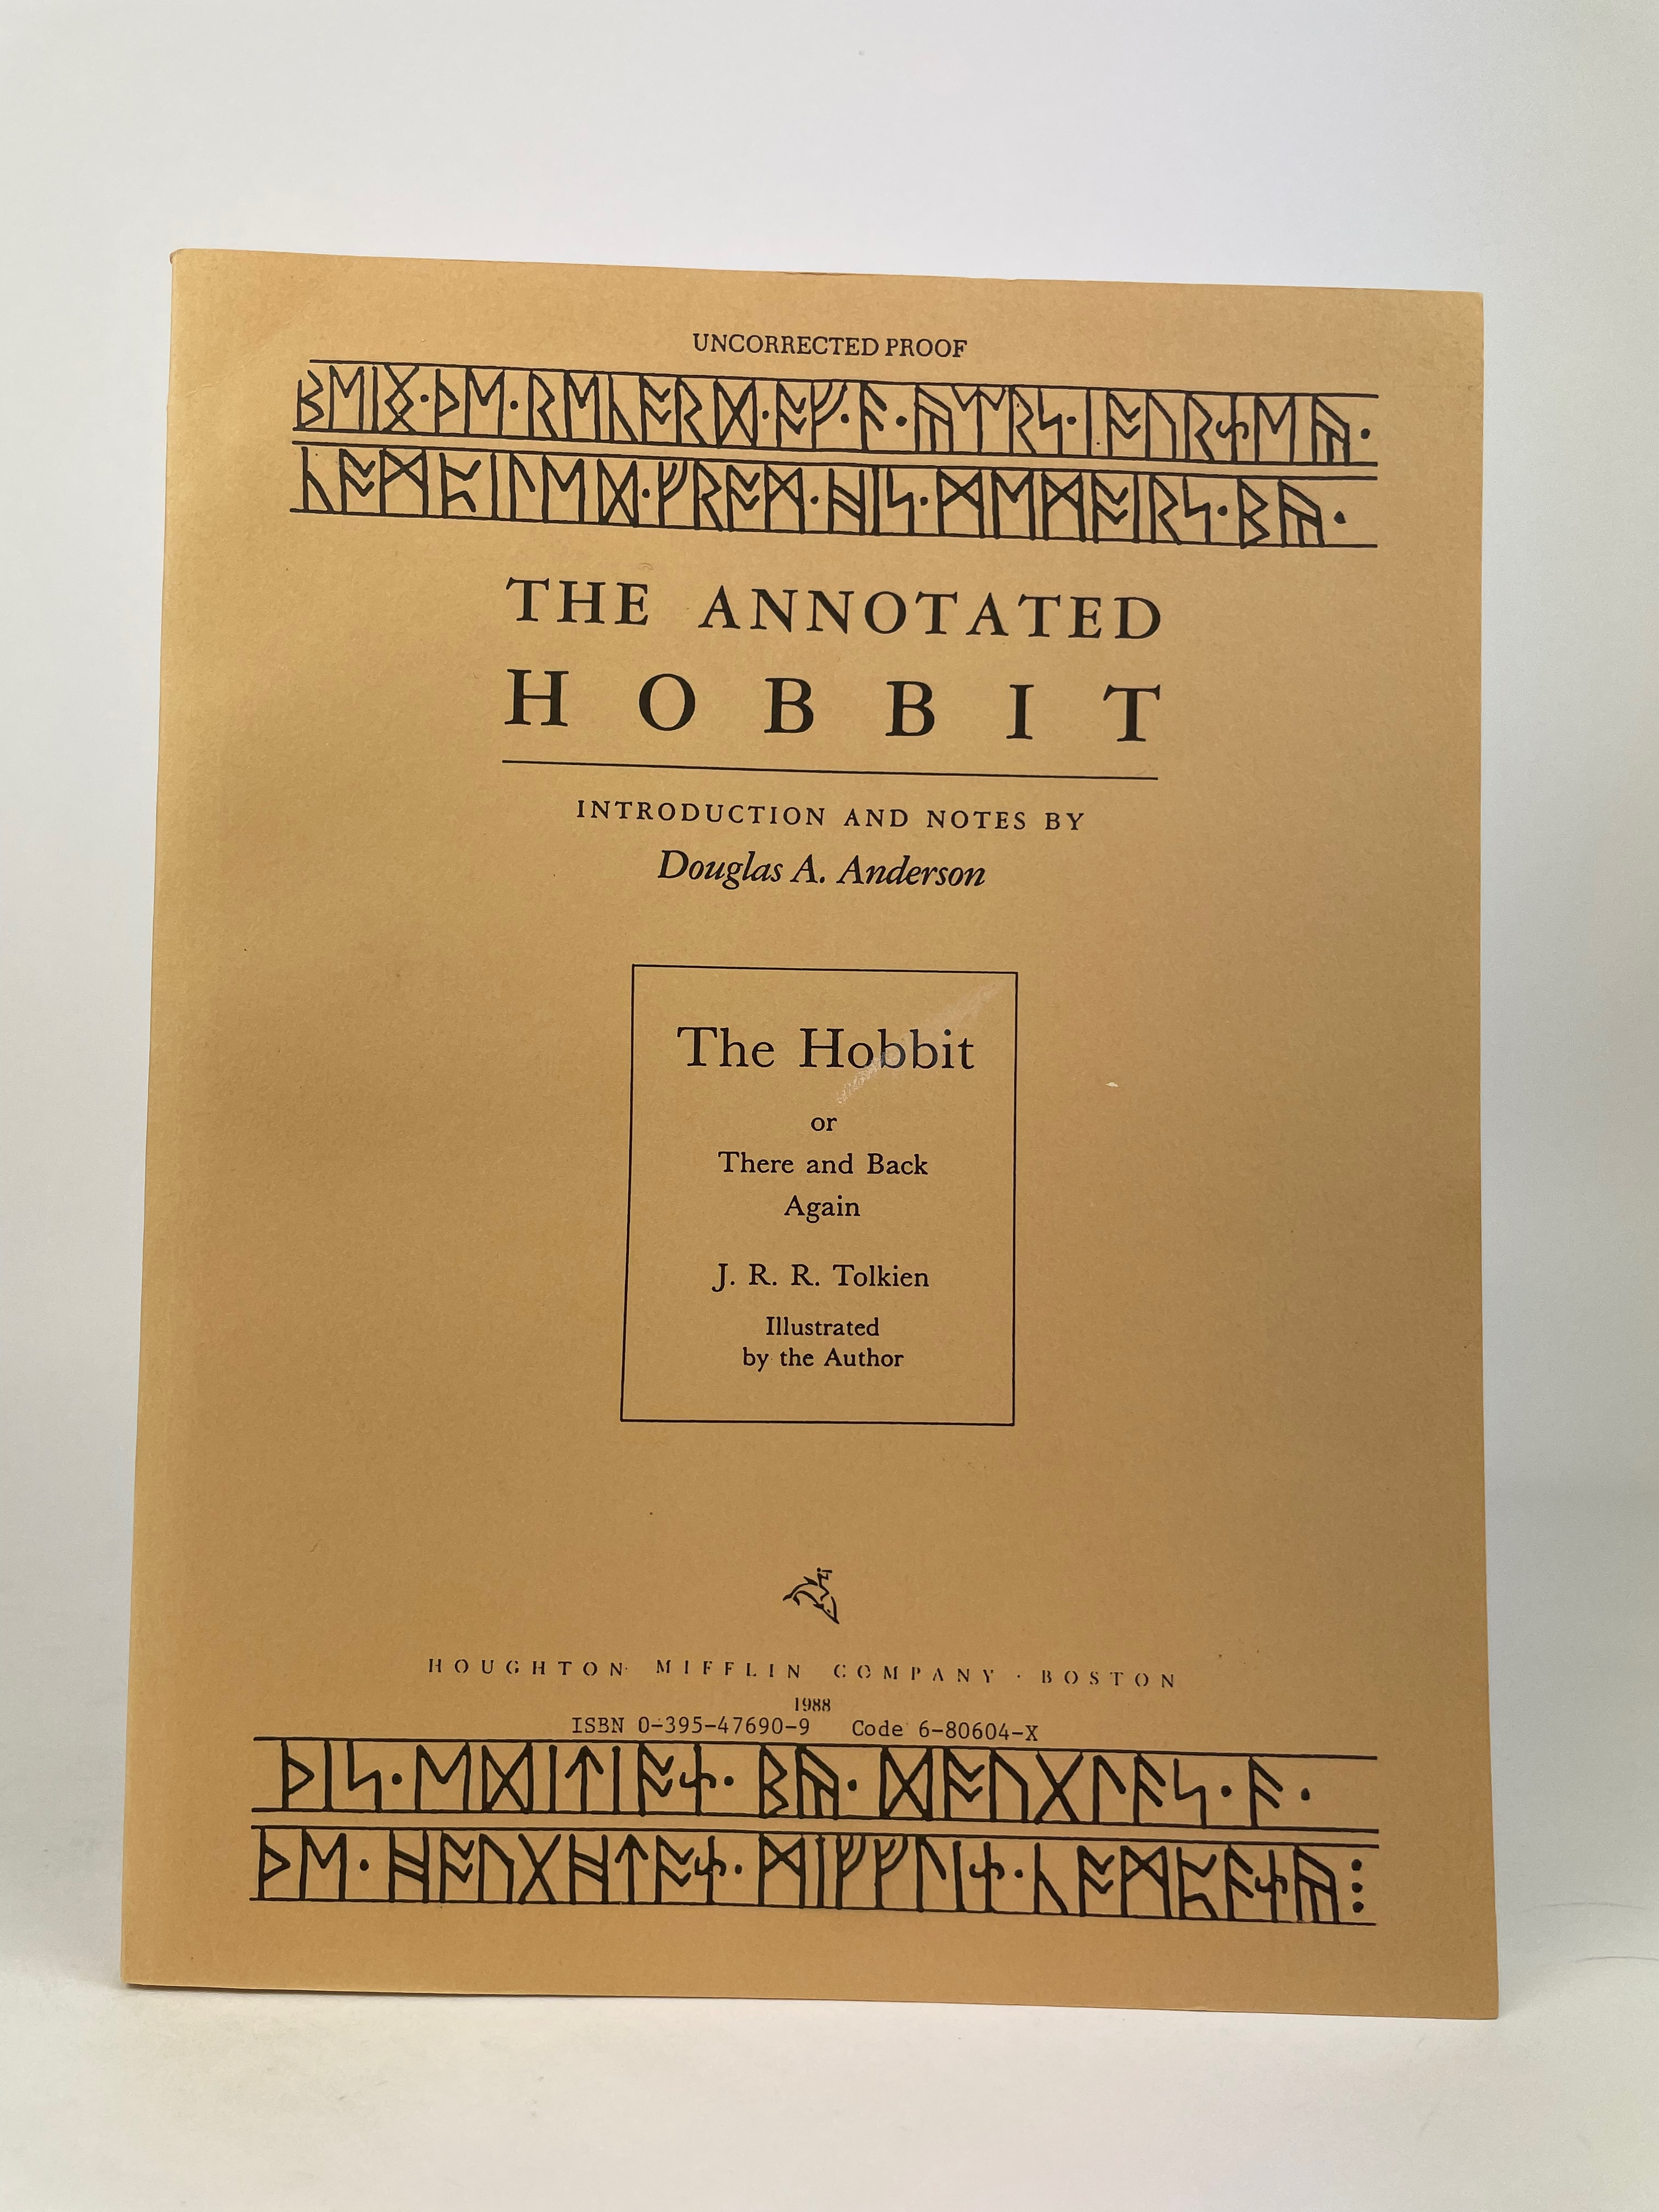 The Annotated Hobbit Uncorrected Proof 1988 1